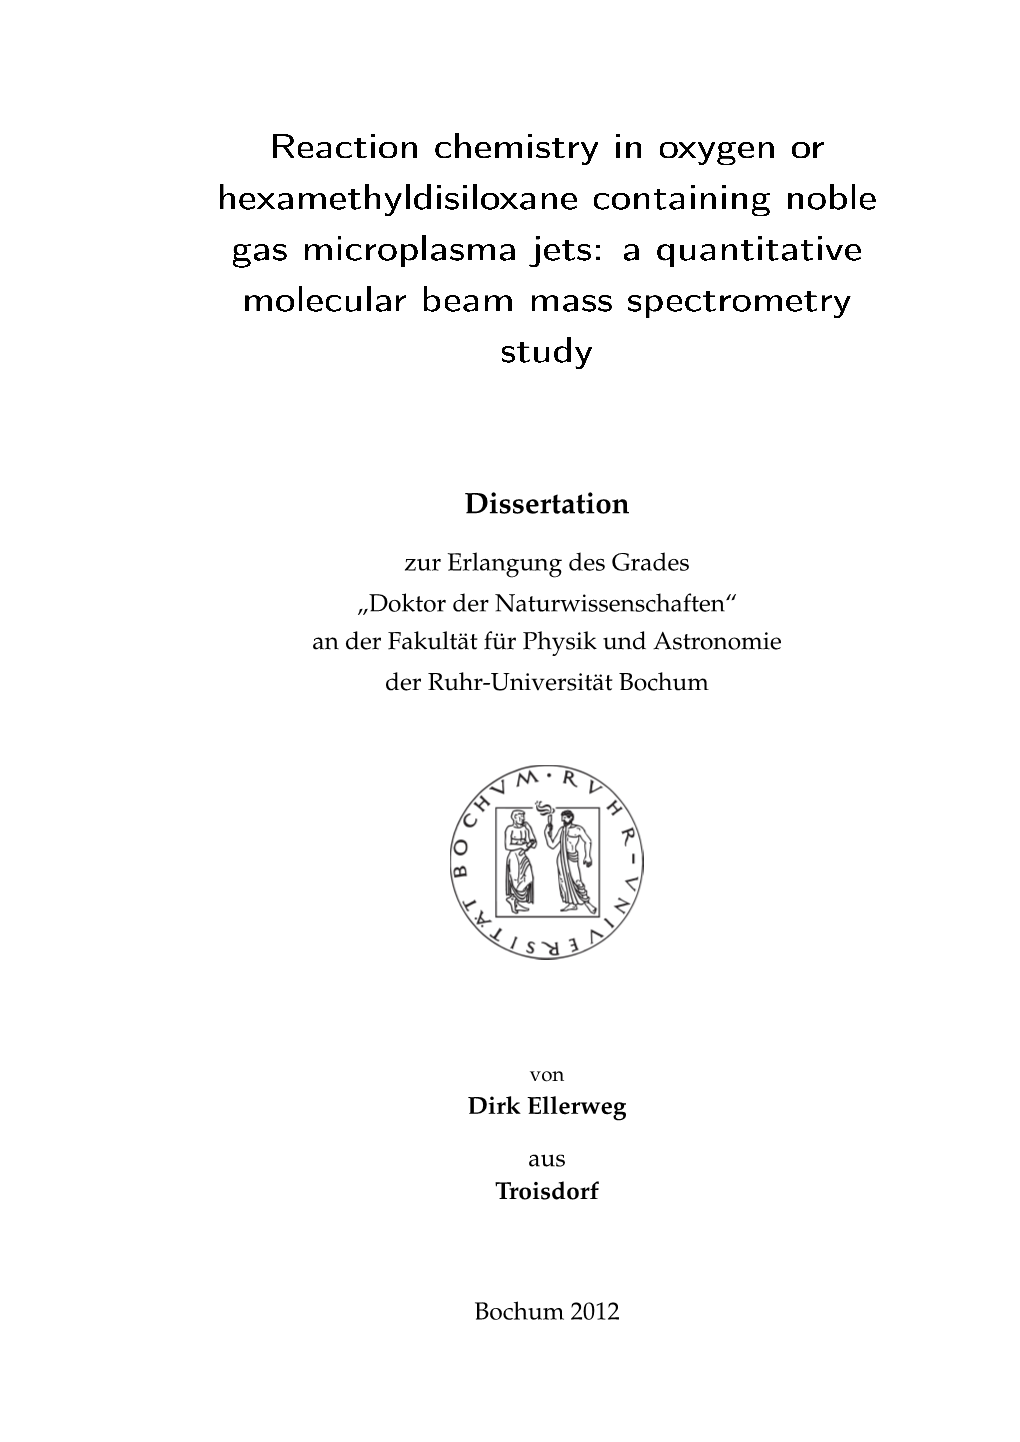 Reaction Chemistry in Oxygen Or Hexamethyldisiloxane Containing Noble Gas Microplasma Jets : a Quantitative Molecular Beam Mass